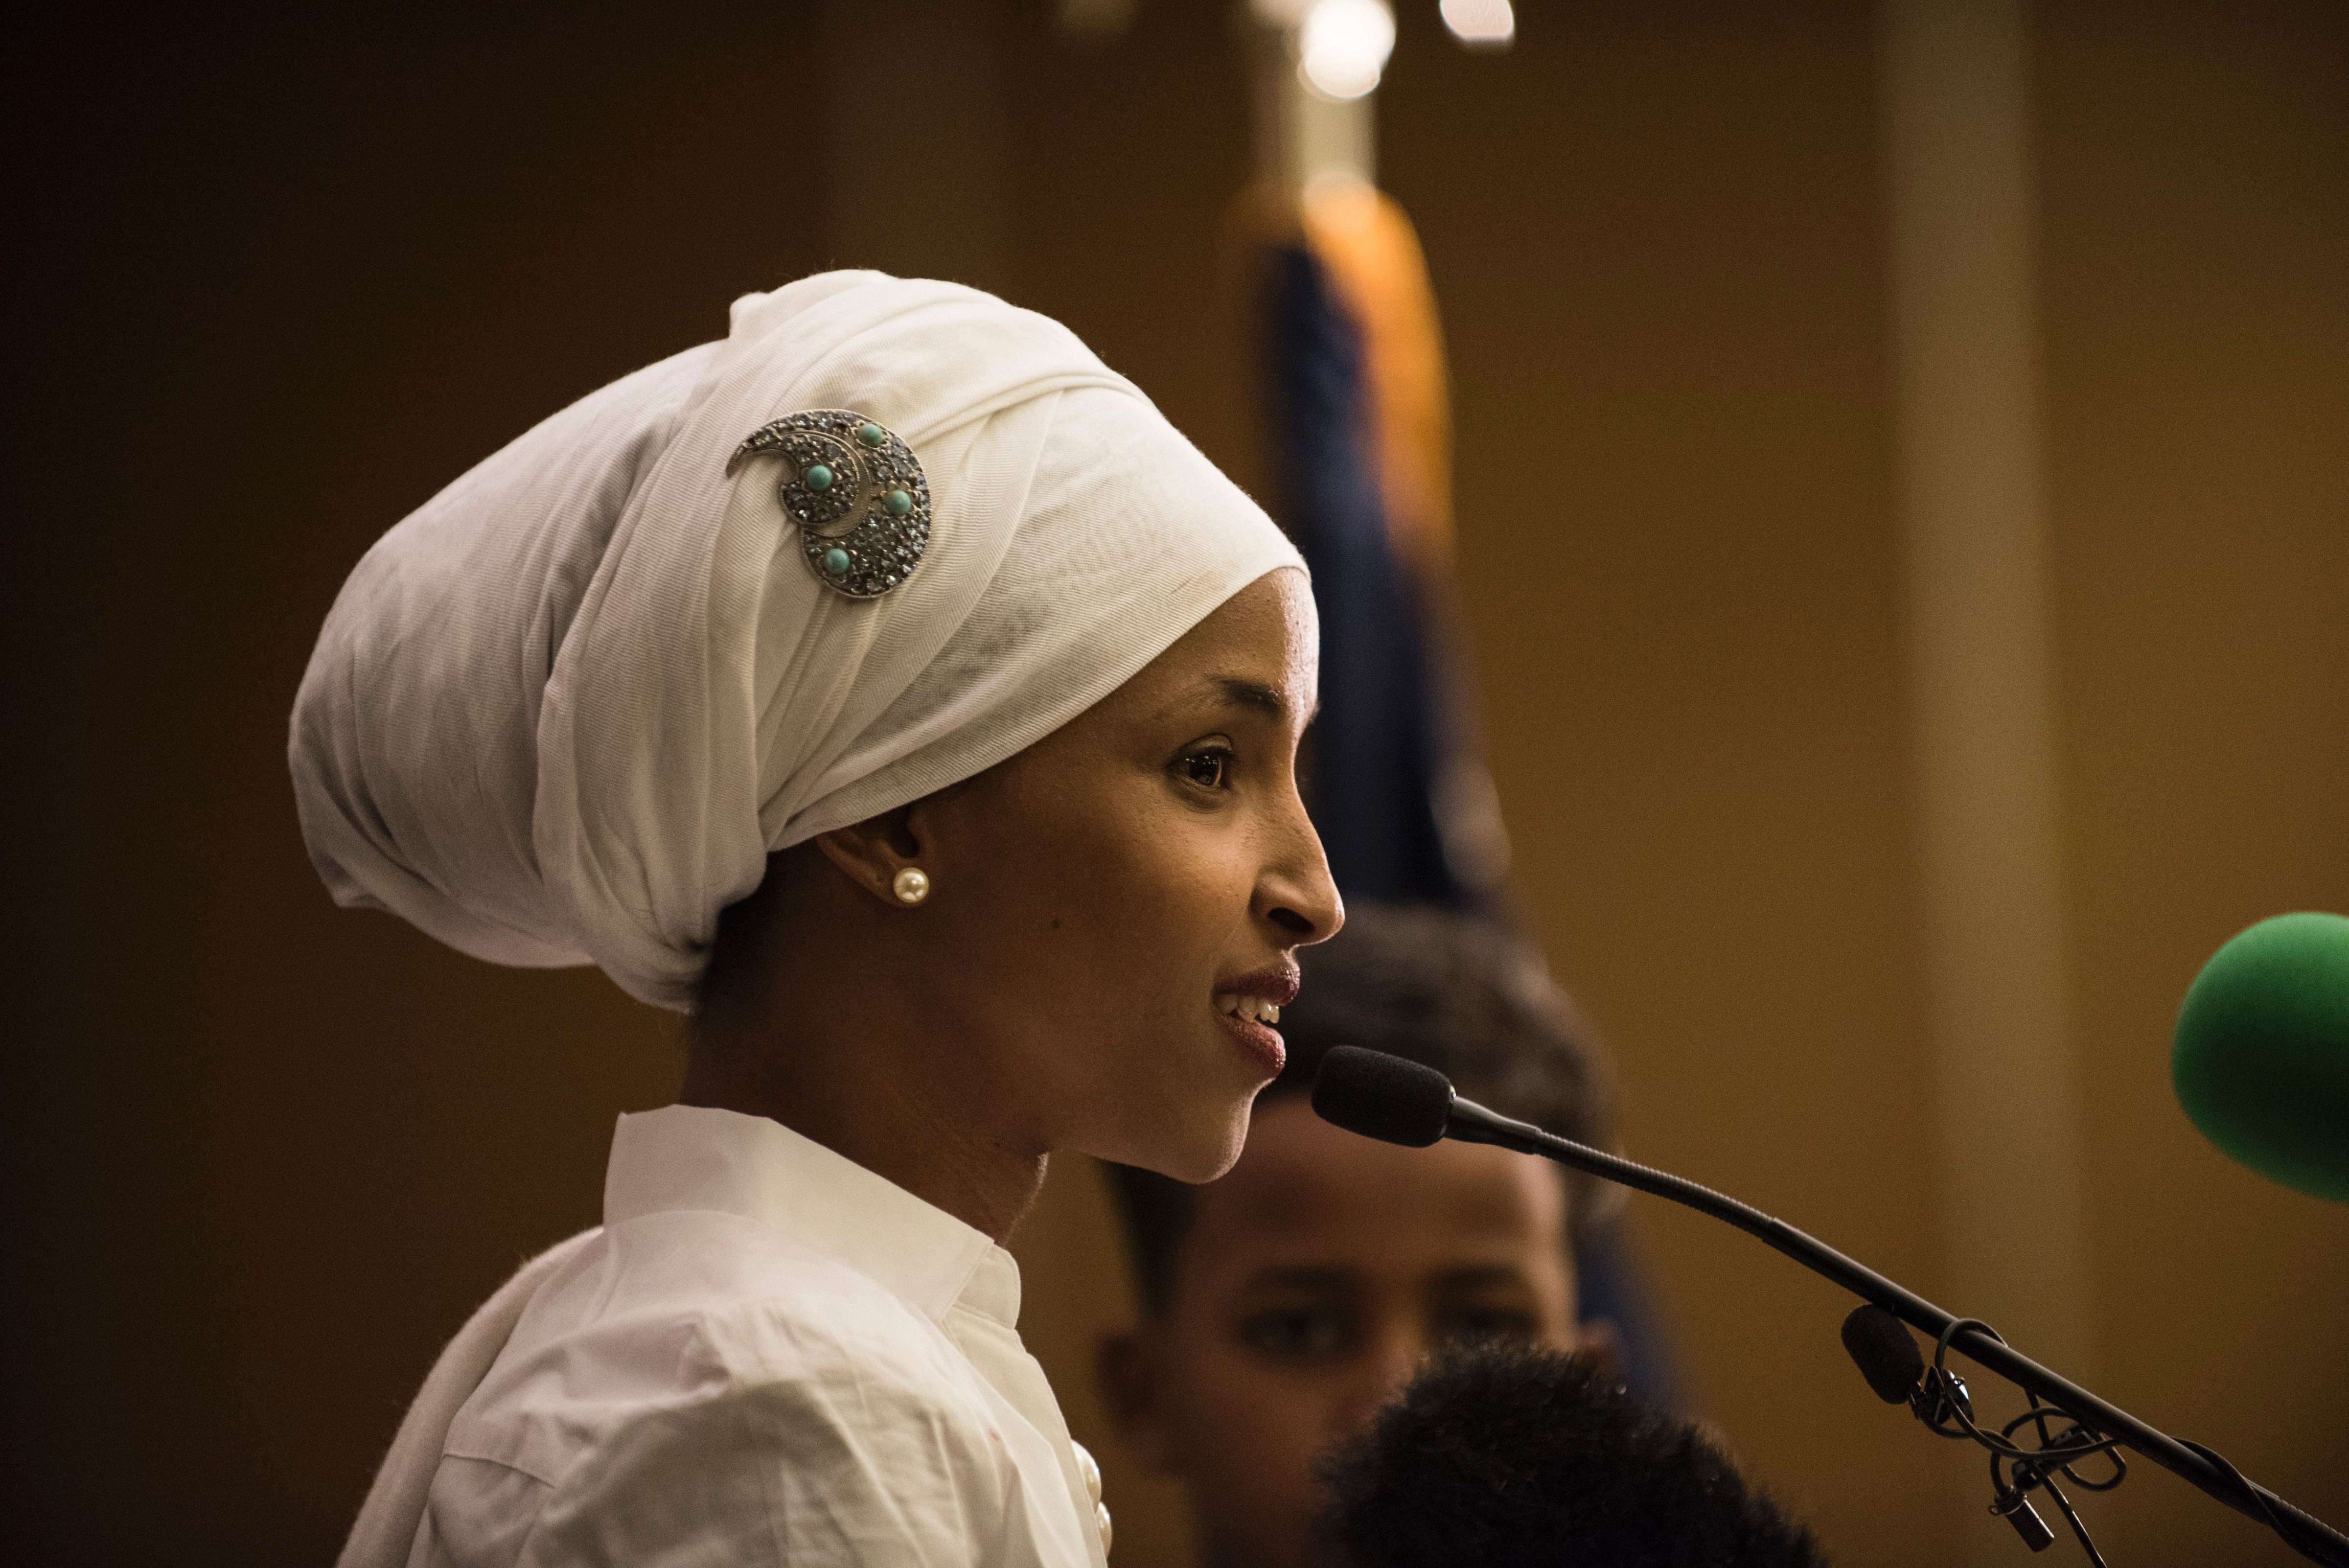 Ilhan Omar, a candidate for State Representative for District 60B in Minnesota, gives an acceptance speech on election night, November 8, 2016 in Minneapolis, Minnesota. (STEPHEN MATUREN—AFP/Getty Images)